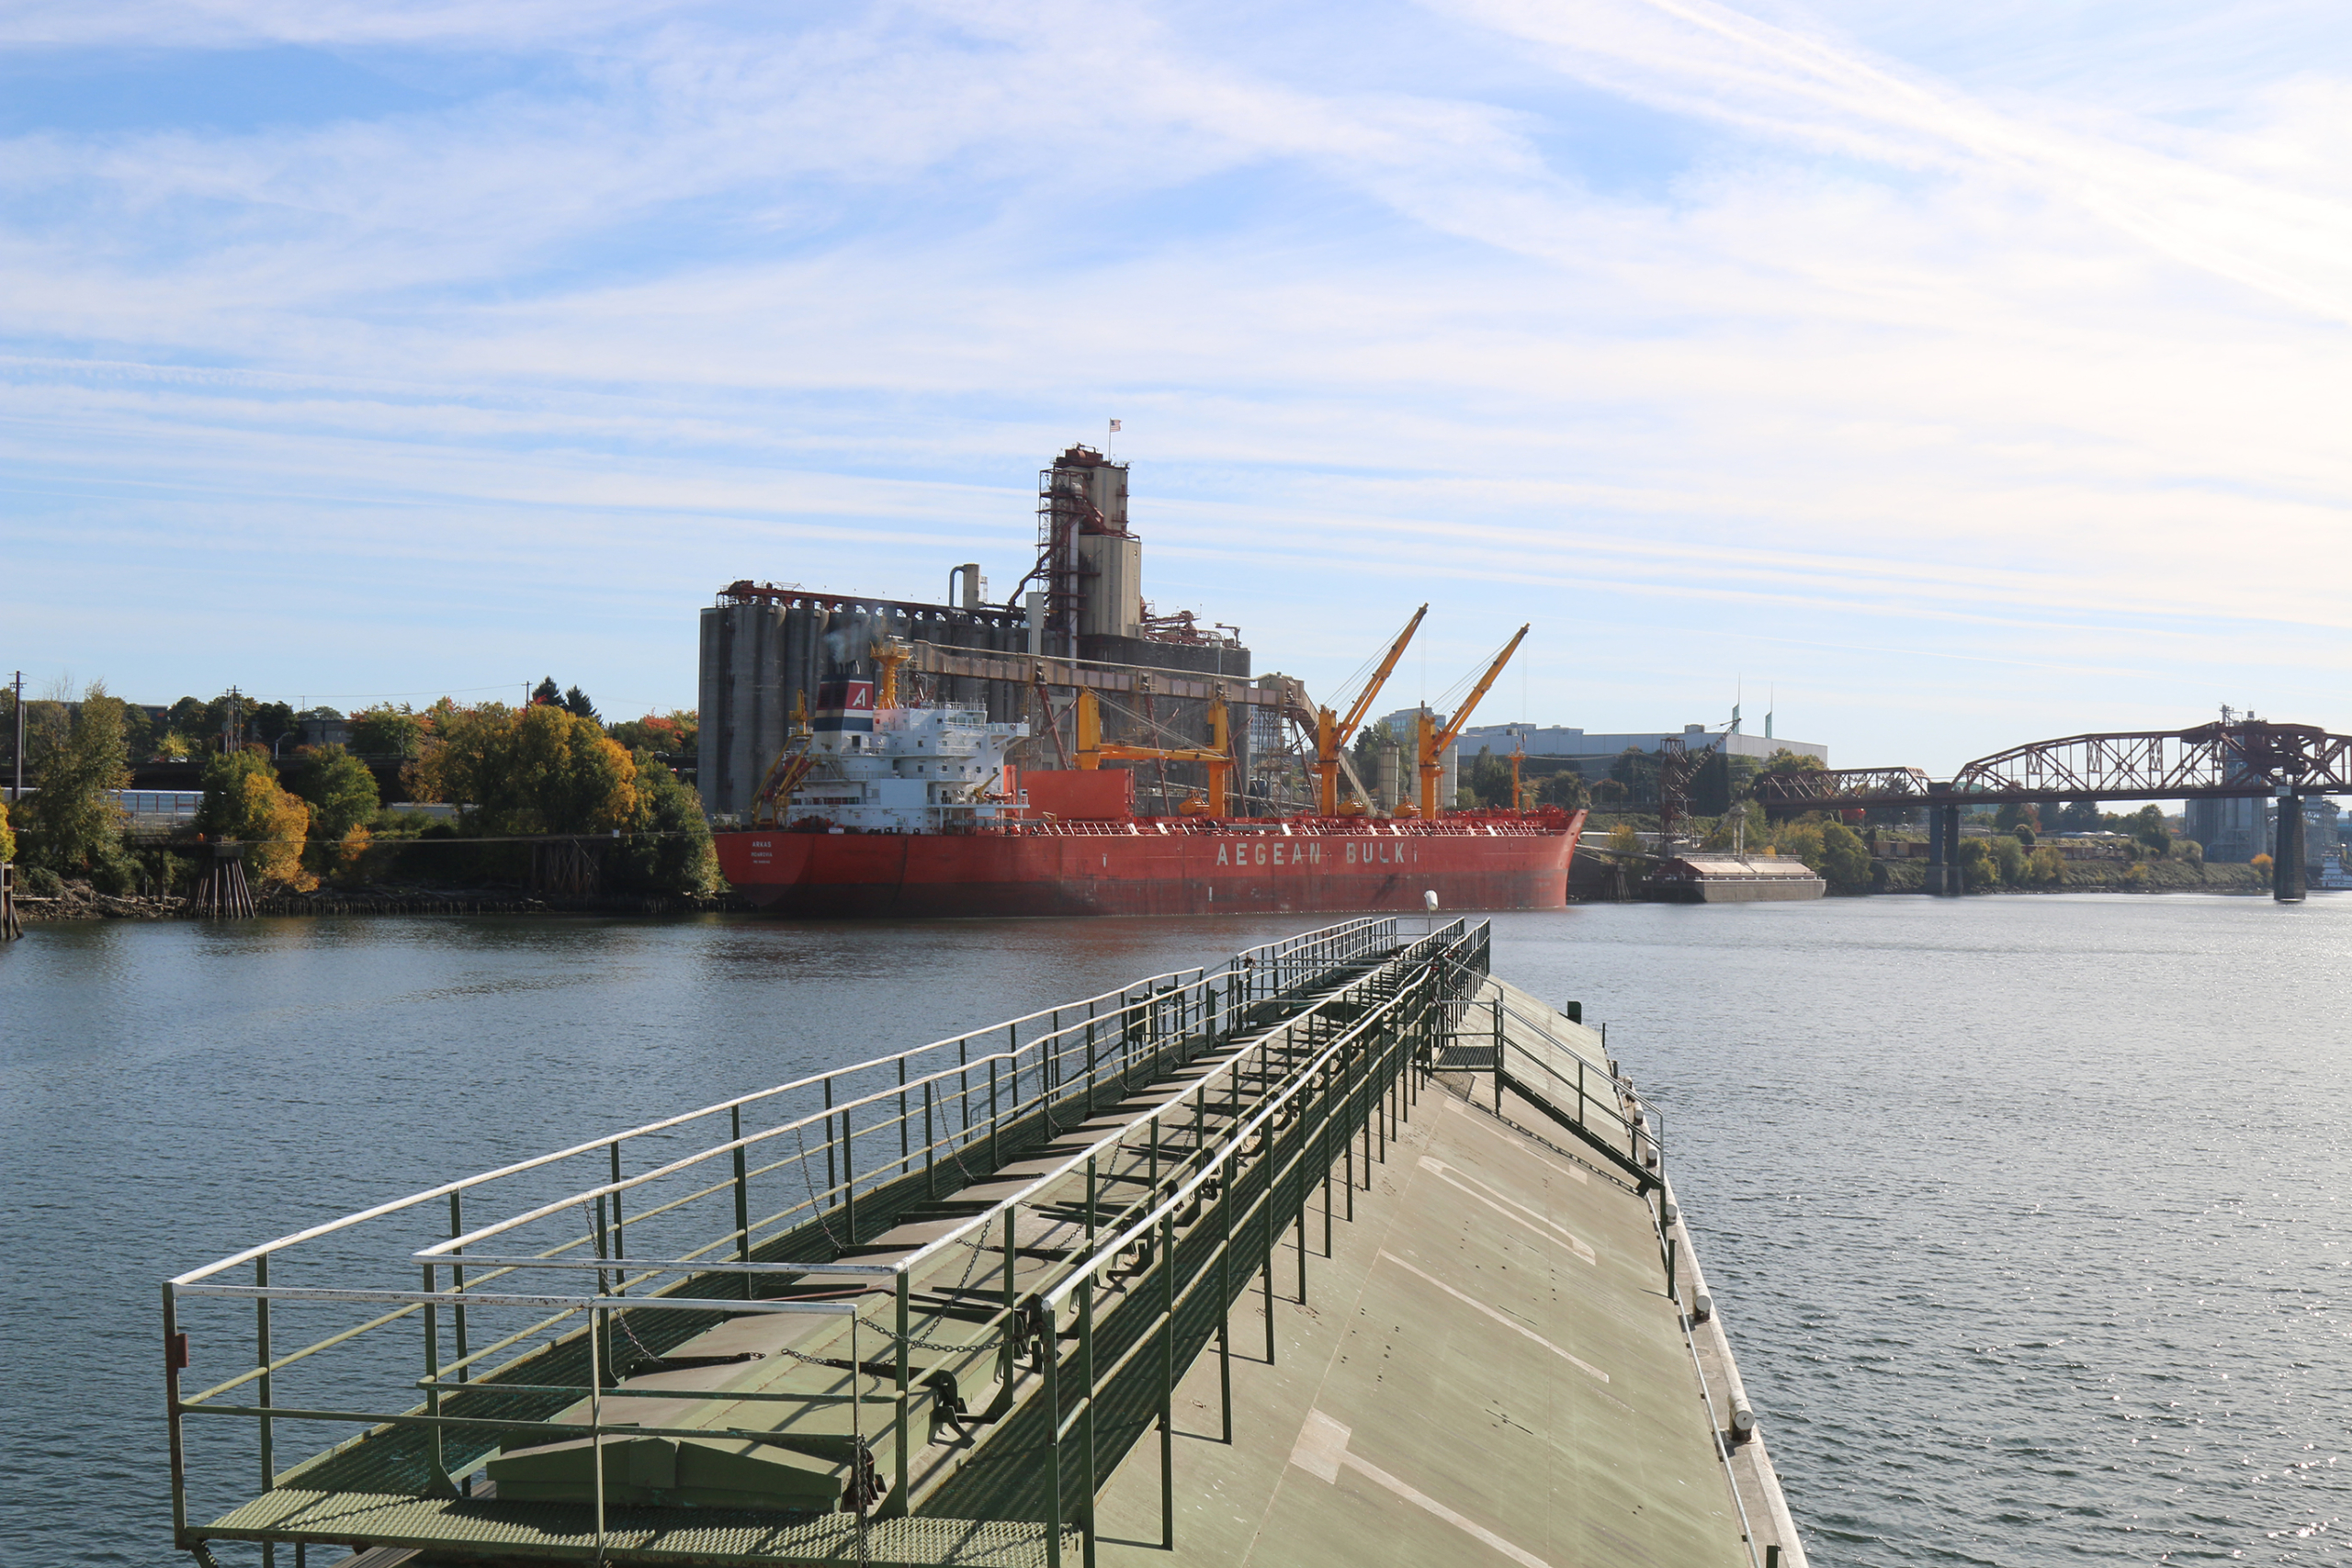 Photo taken from a tugboat pushing a grain barge down the Willamette River toward an export elevator with a bulk vessel docked and ready to be loaded.